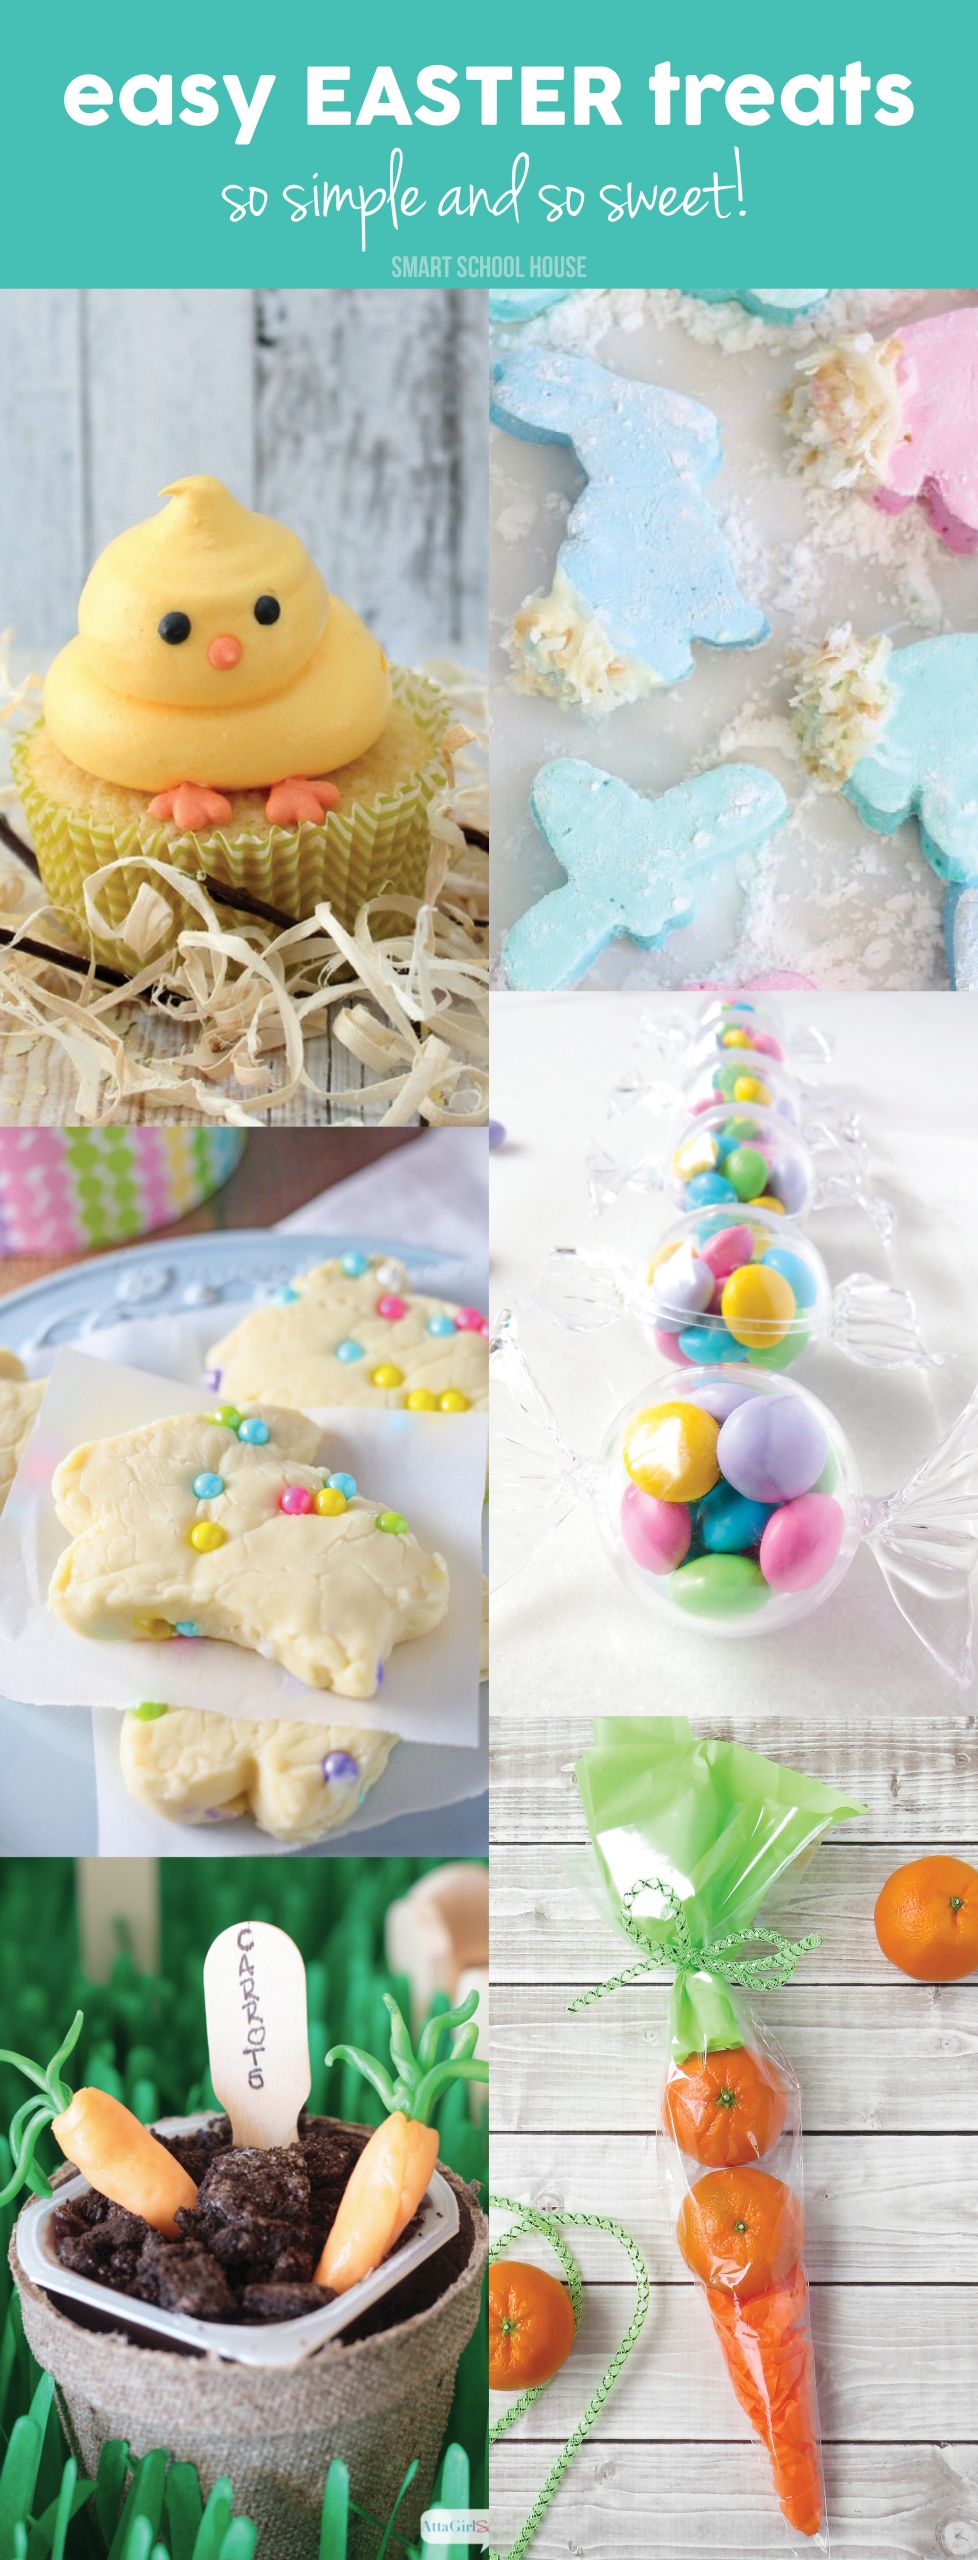 School Easter Party Ideas
 easy easter treats